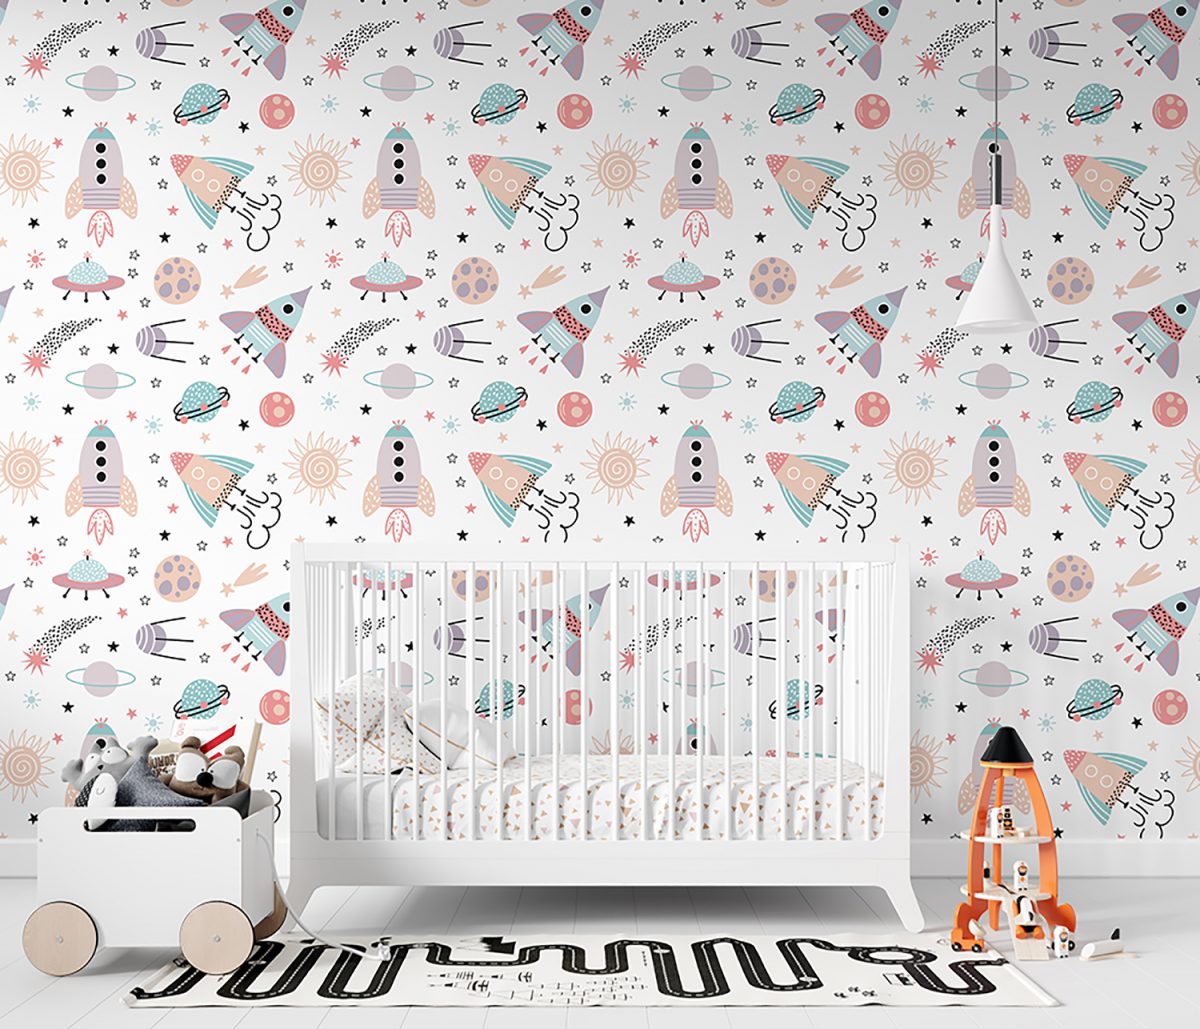 Illustrated Space Themed Rocket Kids Room Wallpaper